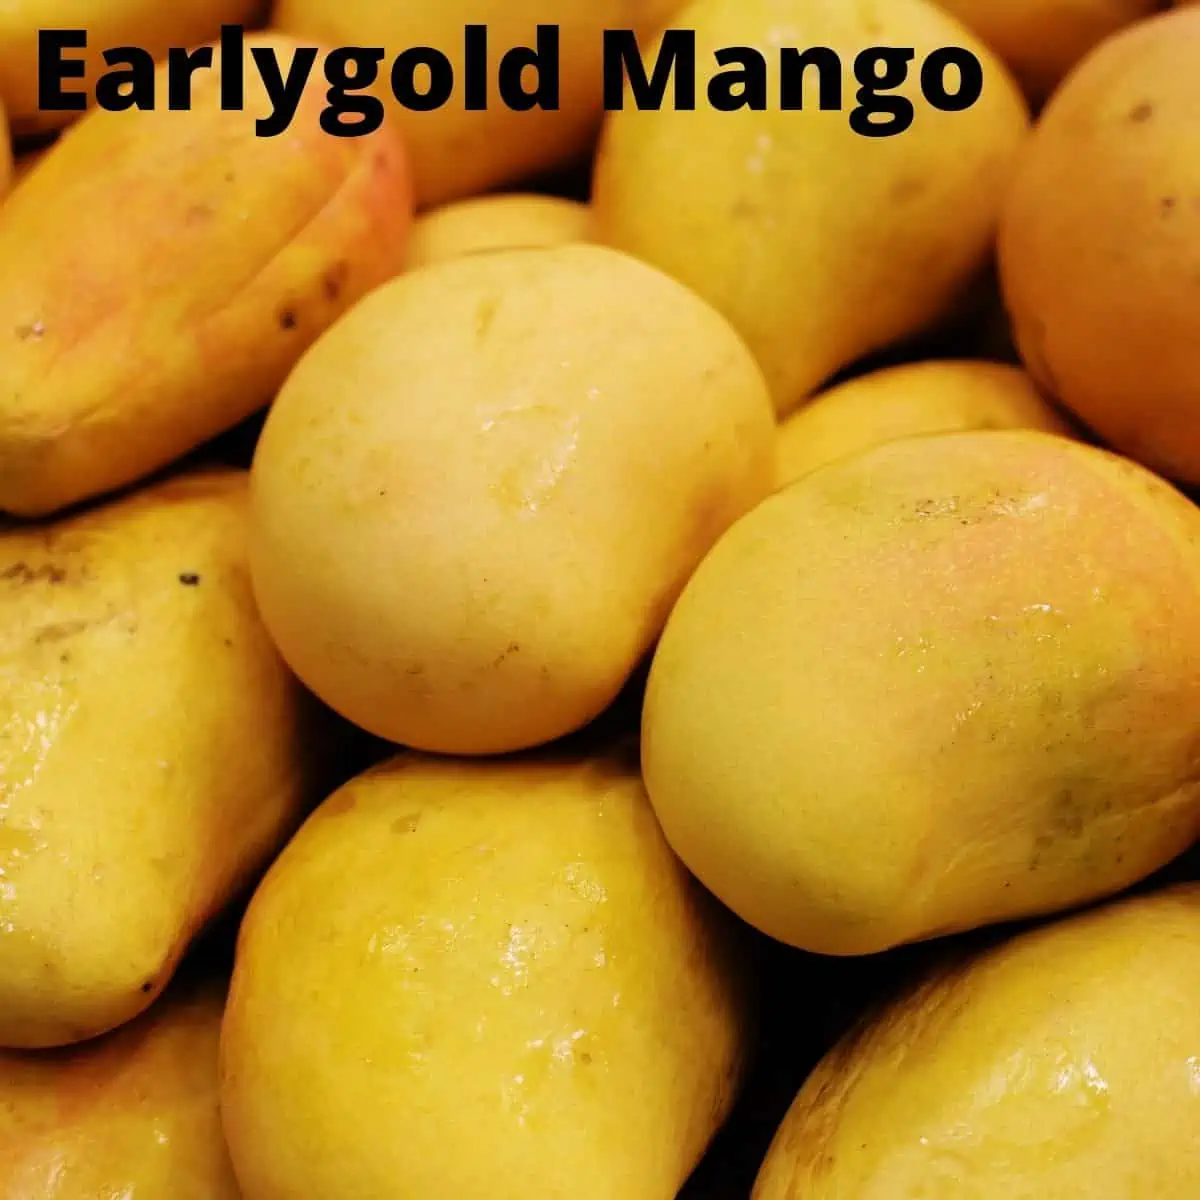 Earlygold mangos in pile. 